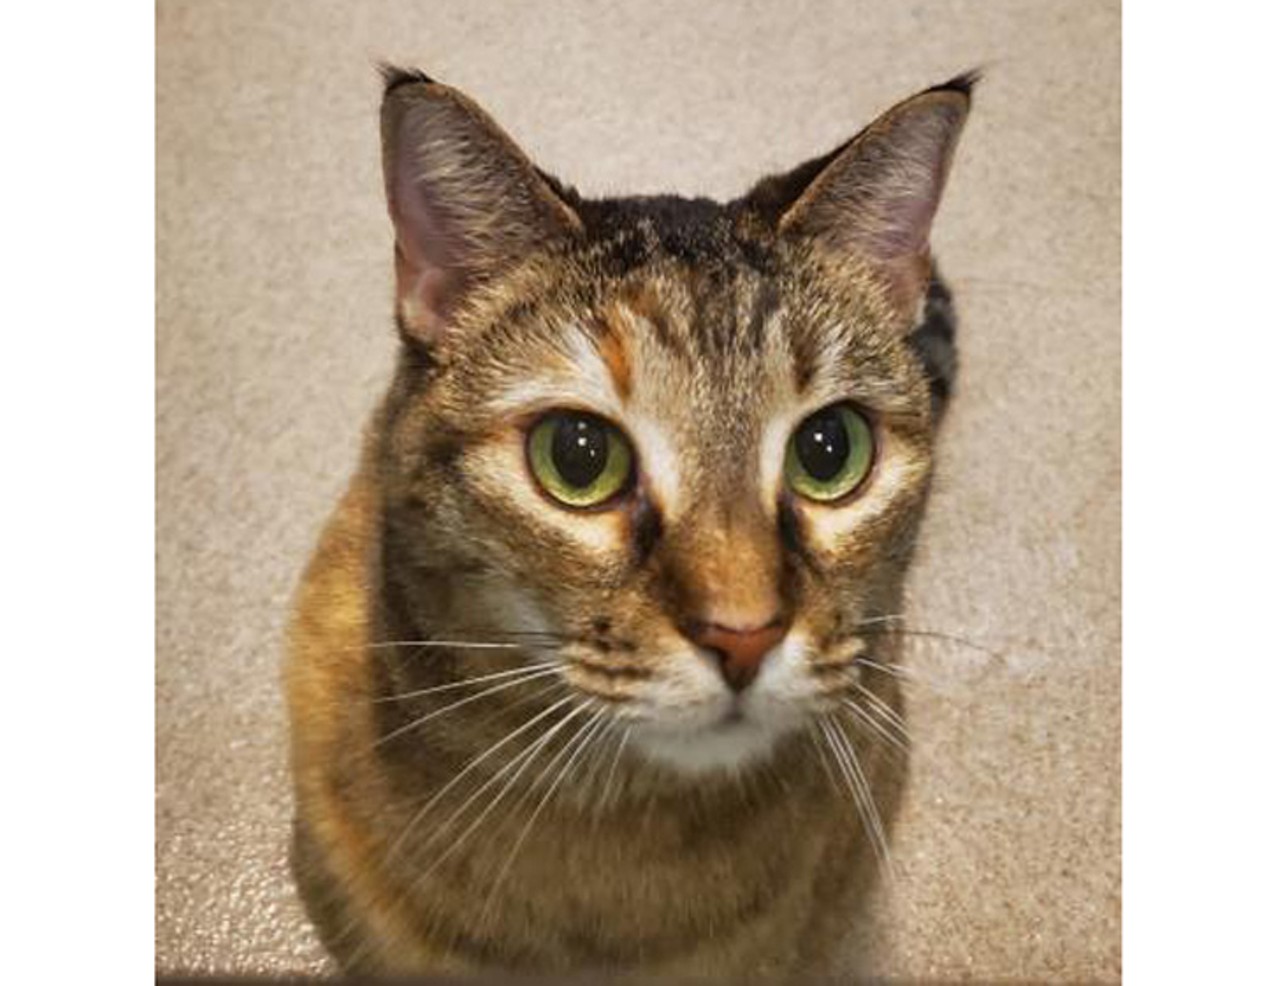 CeCe, a 9-year-old female cat, is at the Sanford shelter. CeCe has a heart &#150; and a coat &#150; of gold!